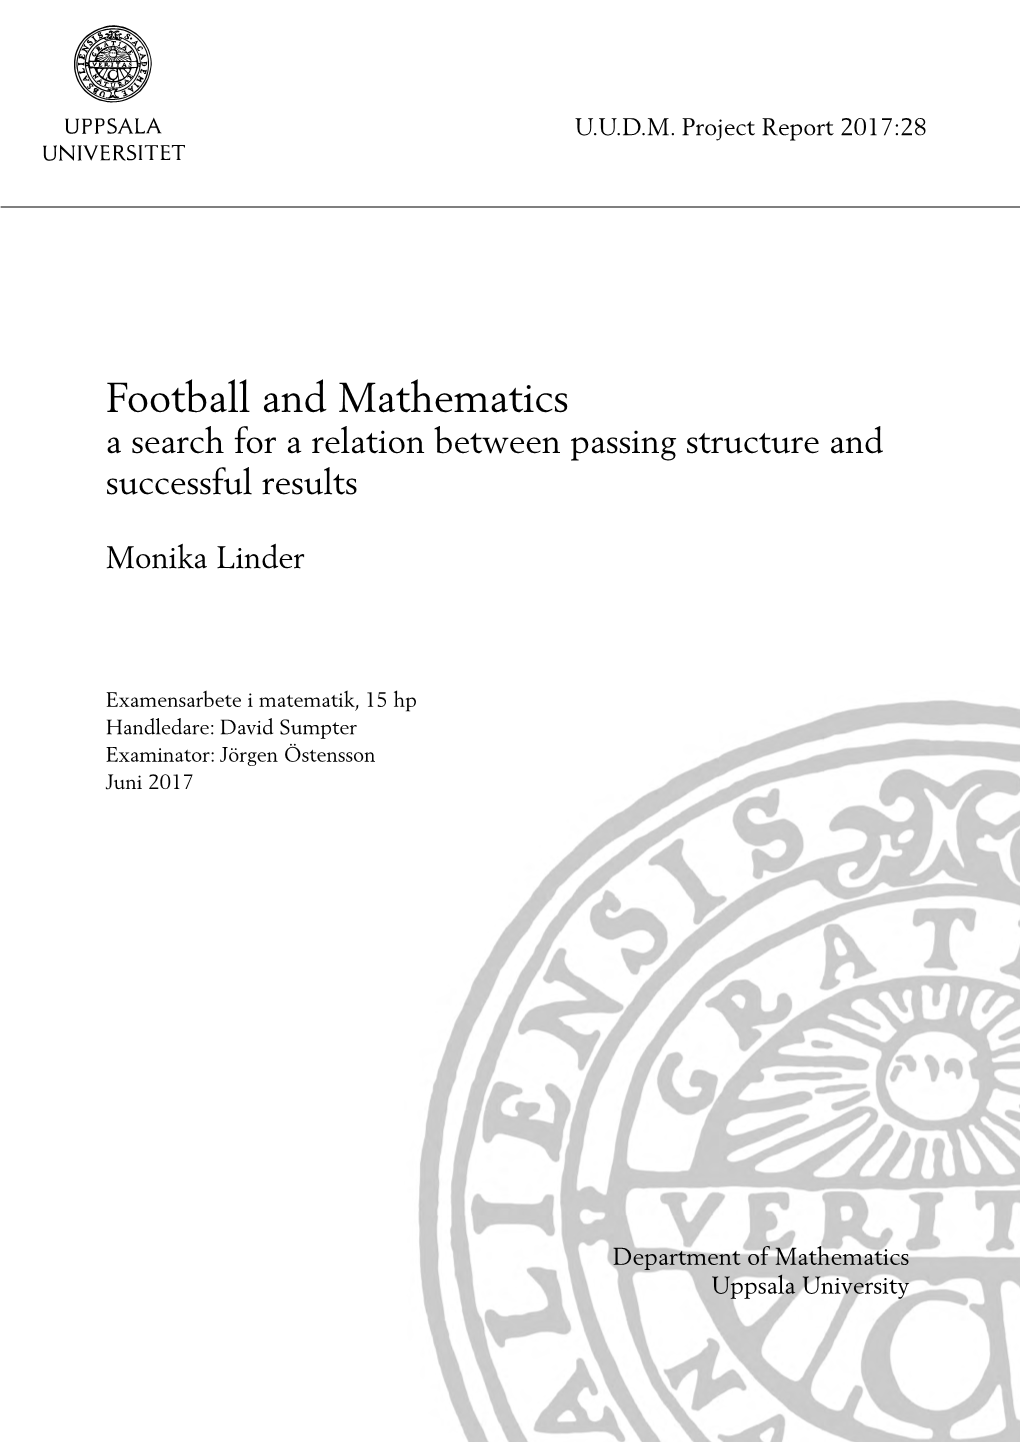 Football and Mathematics a Search for a Relation Between Passing Structure and Successful Results